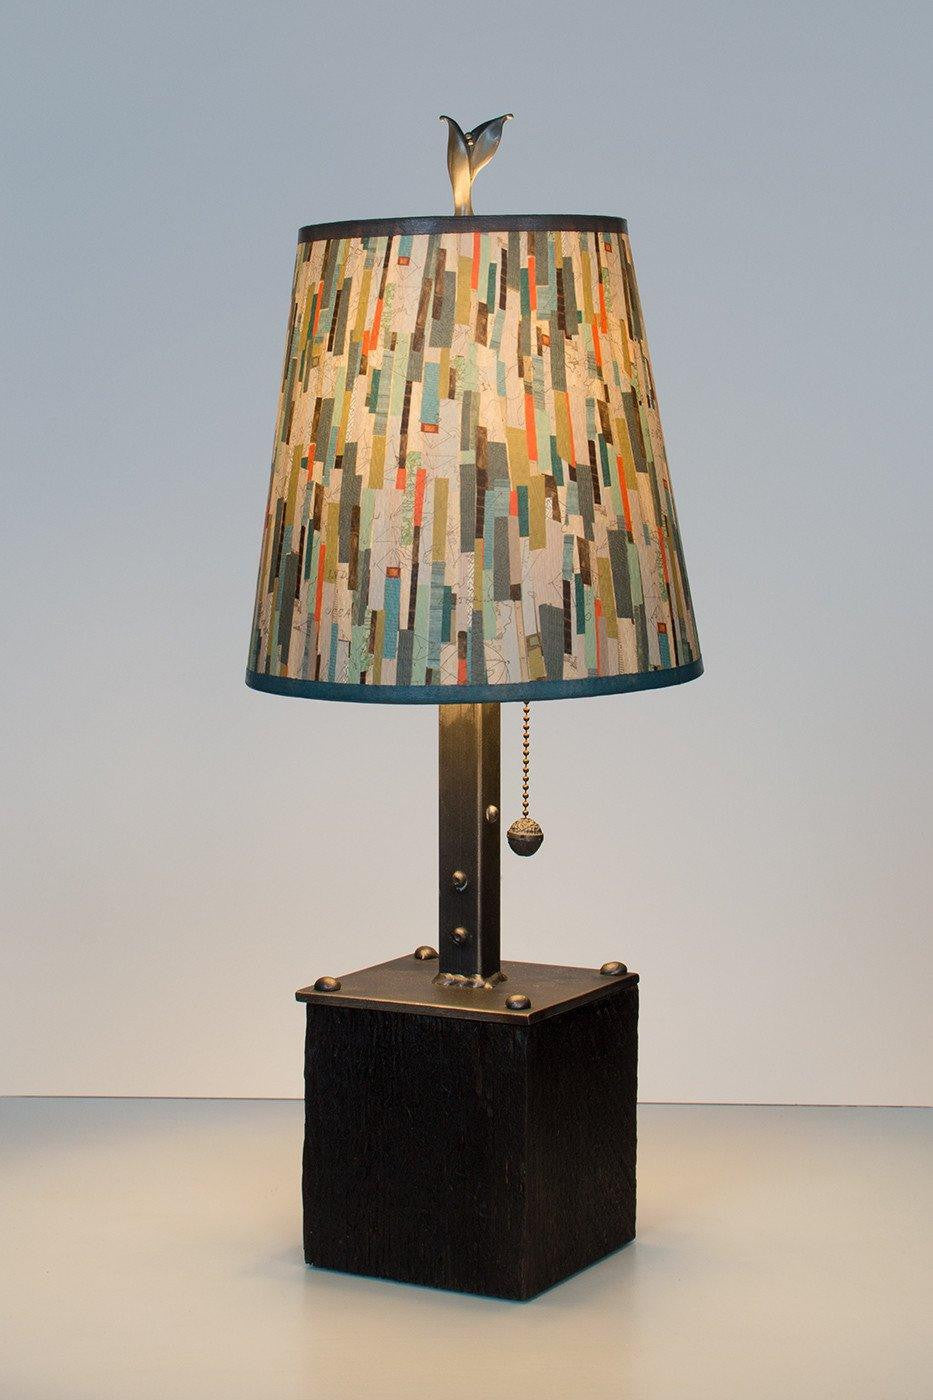 Janna Ugone & Co Table Lamps Steel Table Lamp on Reclaimed Wood with Small Drum Shade in Papers